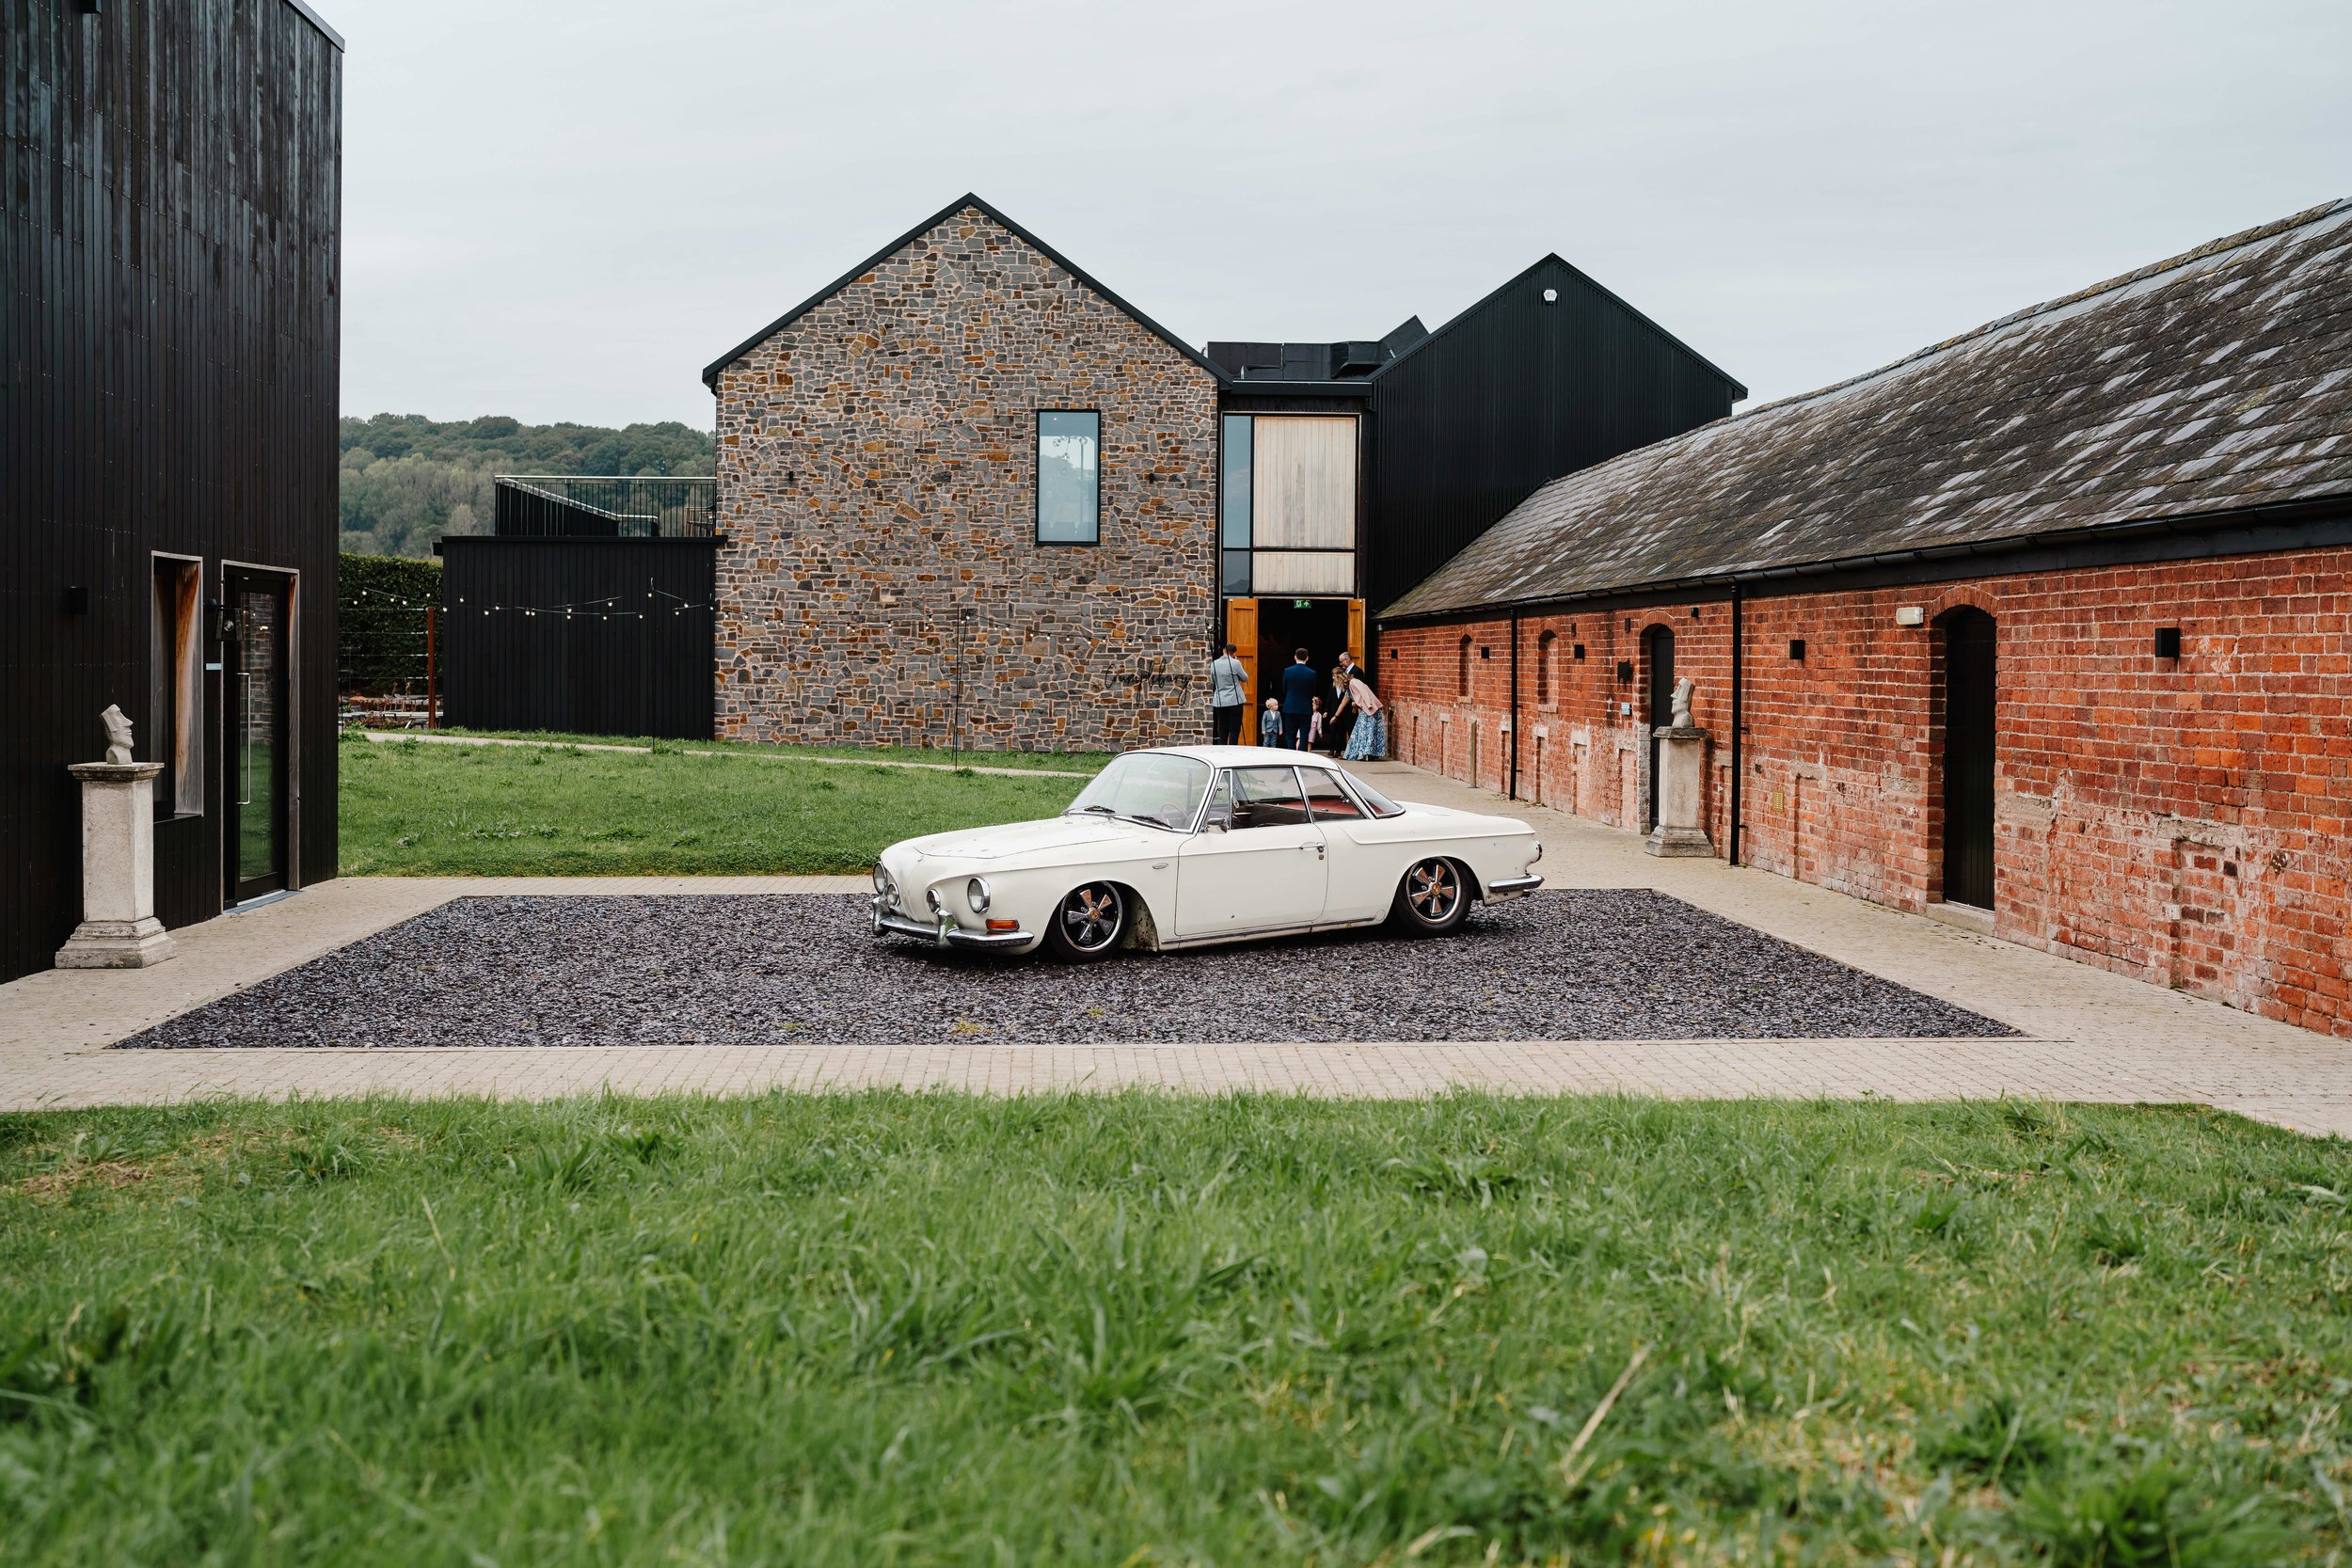 Crumplebury Wedding venue photographed from outsidewith vintage car